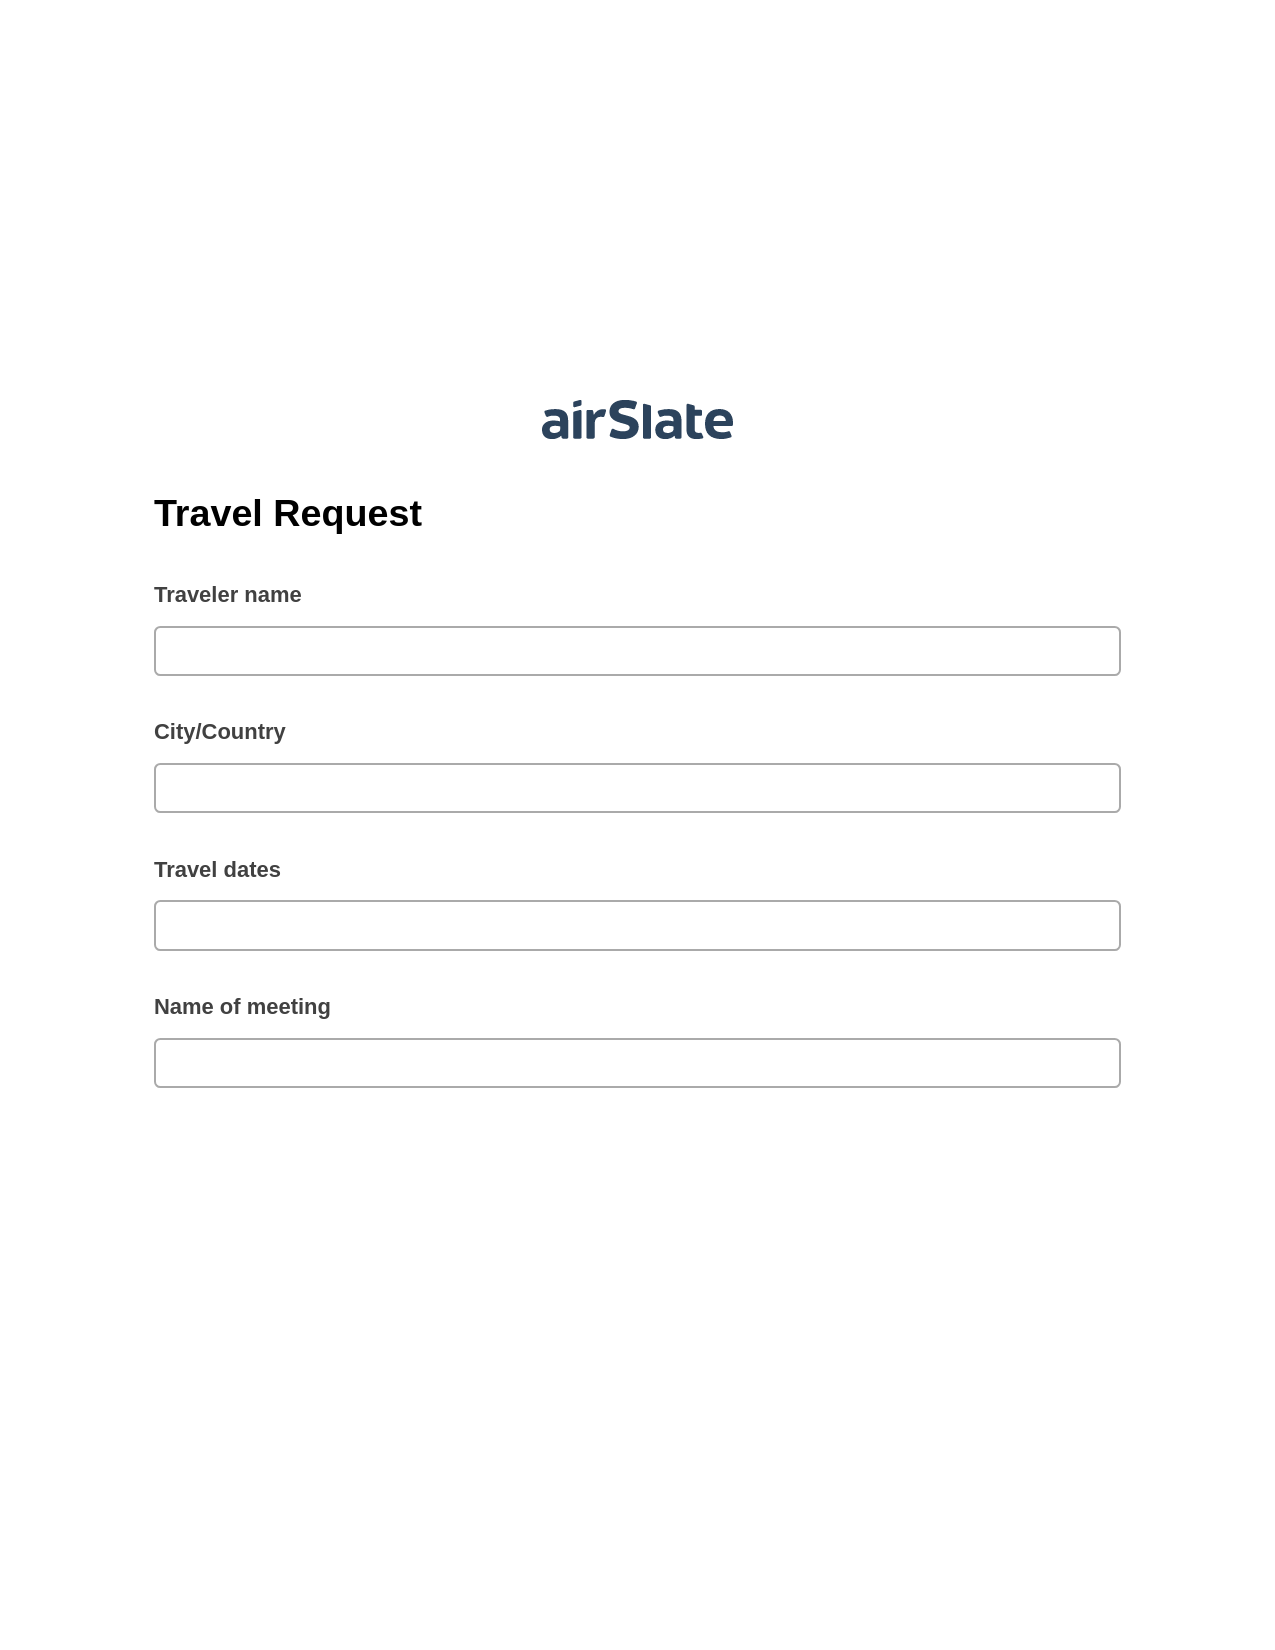 Travel Request Pre-fill Dropdown from Airtable, Create Slate Reminder Bot, Export to Excel 365 Bot